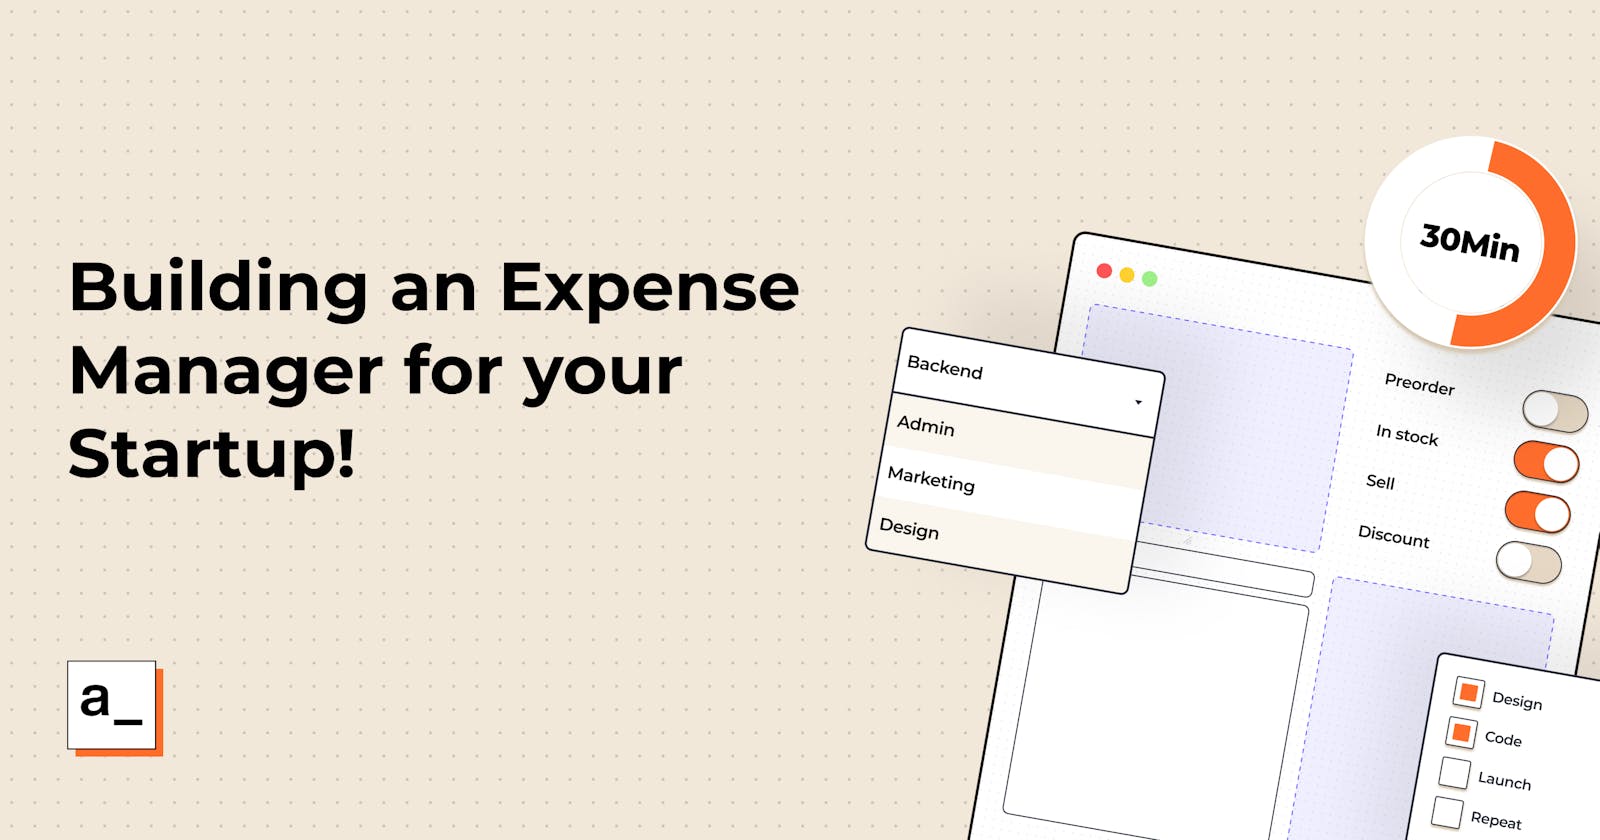 Building an Expense Manager for your Startup!